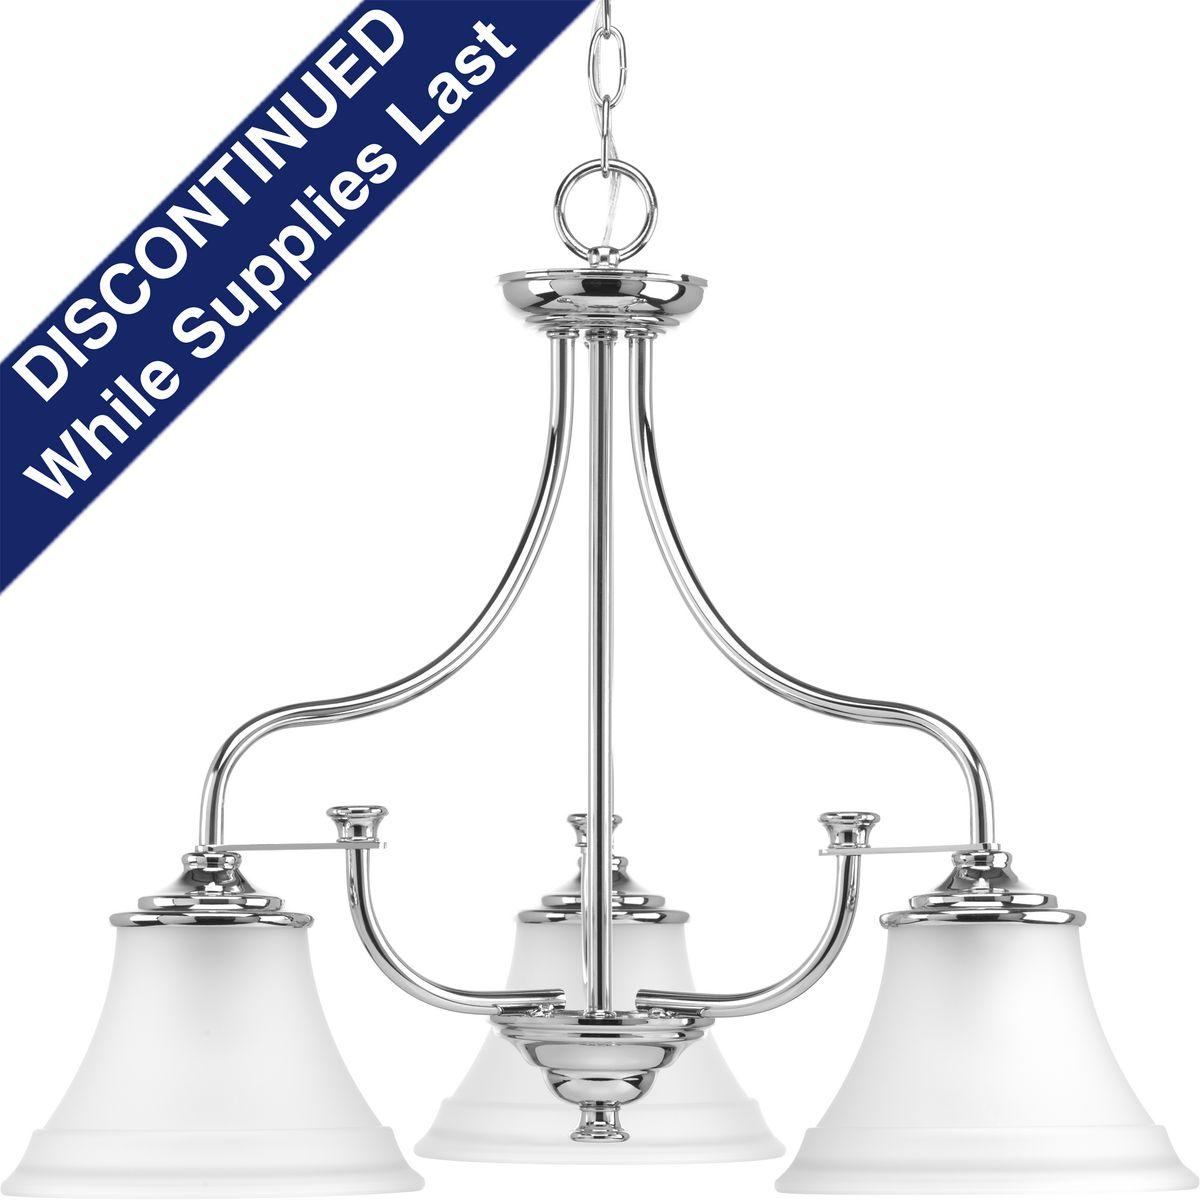 Hubbell P400065-015 Featuring soft angles and impressive sculptural curves, Tinsley is a refreshingly updated design for Luxe, Transitional and Traditional interiors. The frame is complemented by classic etched glass shades or open candle designs. Overscaled details found in